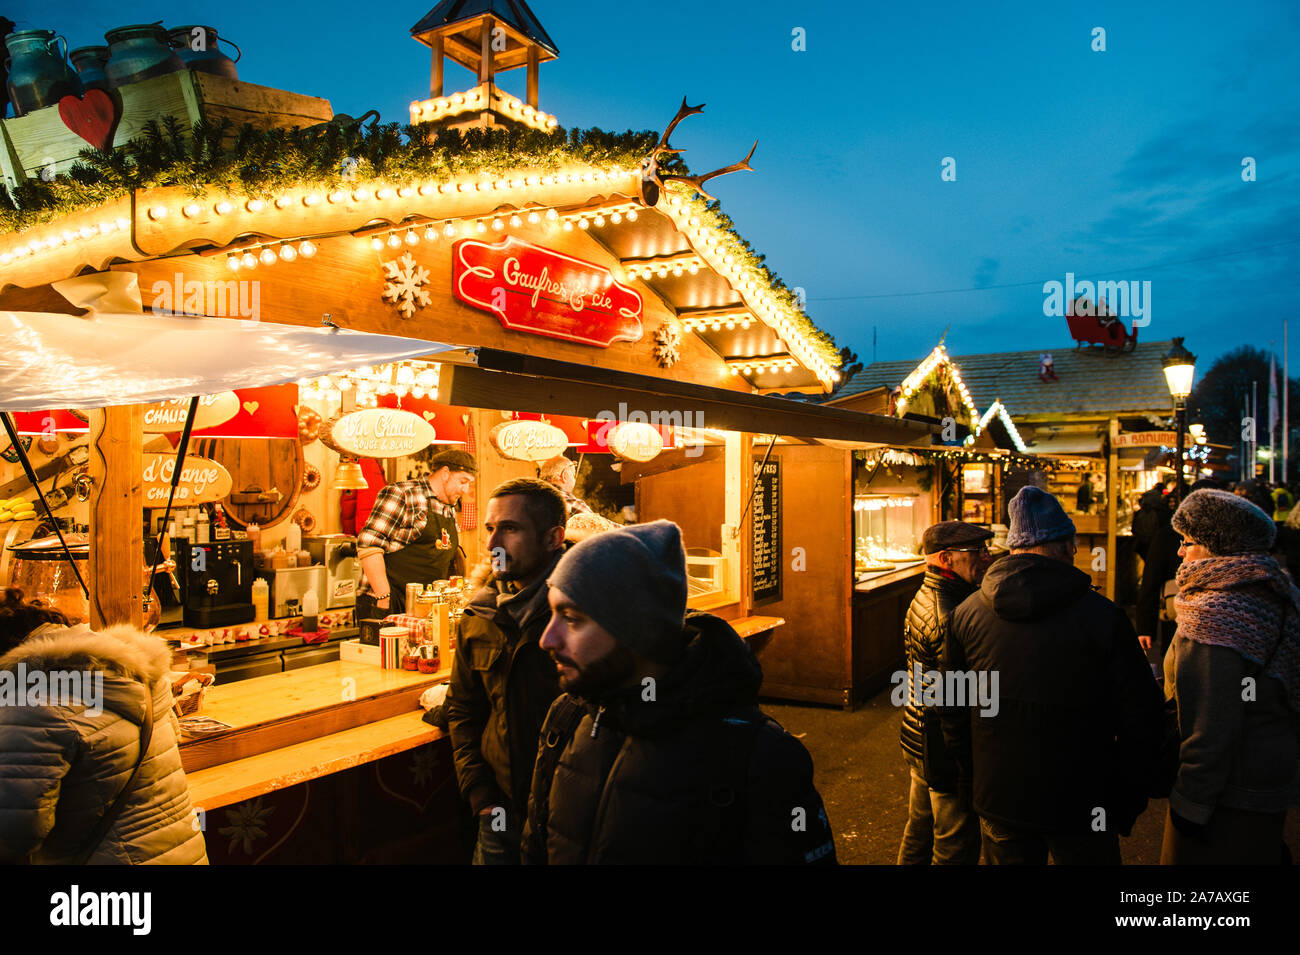 Strasbourg, France - Dec 9, 2016: Tourists and locals passing by a stall in the mythical Christmas market proposing traditional waffles, pancakes and mulled wine Stock Photo